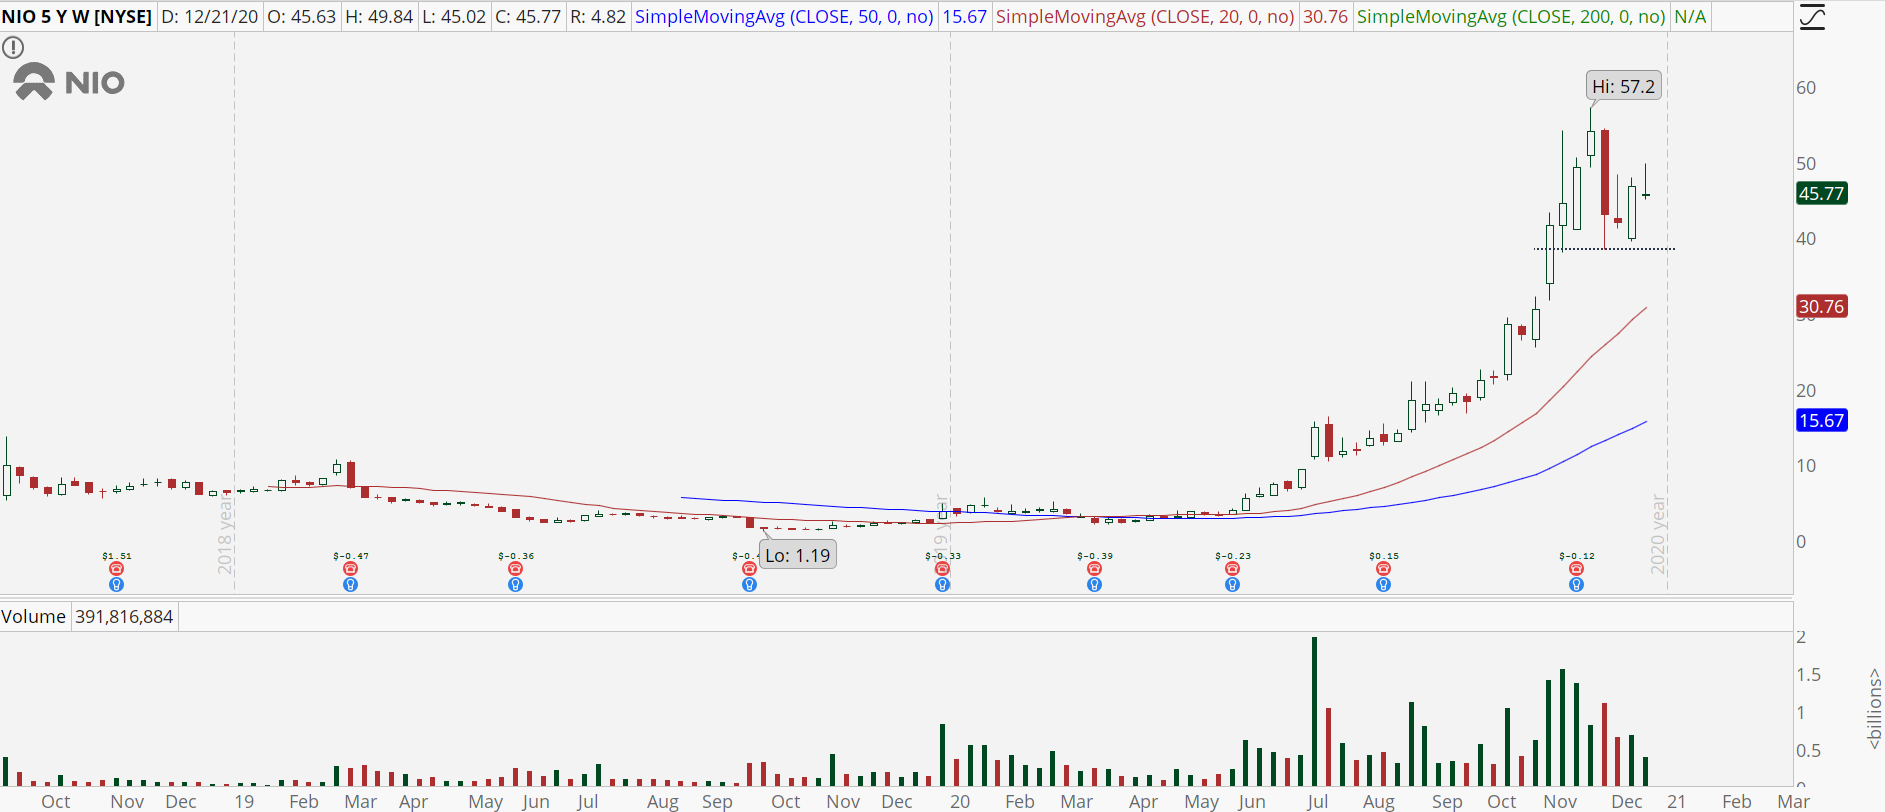 Nio (NIO) stock weekly chart with support at $40